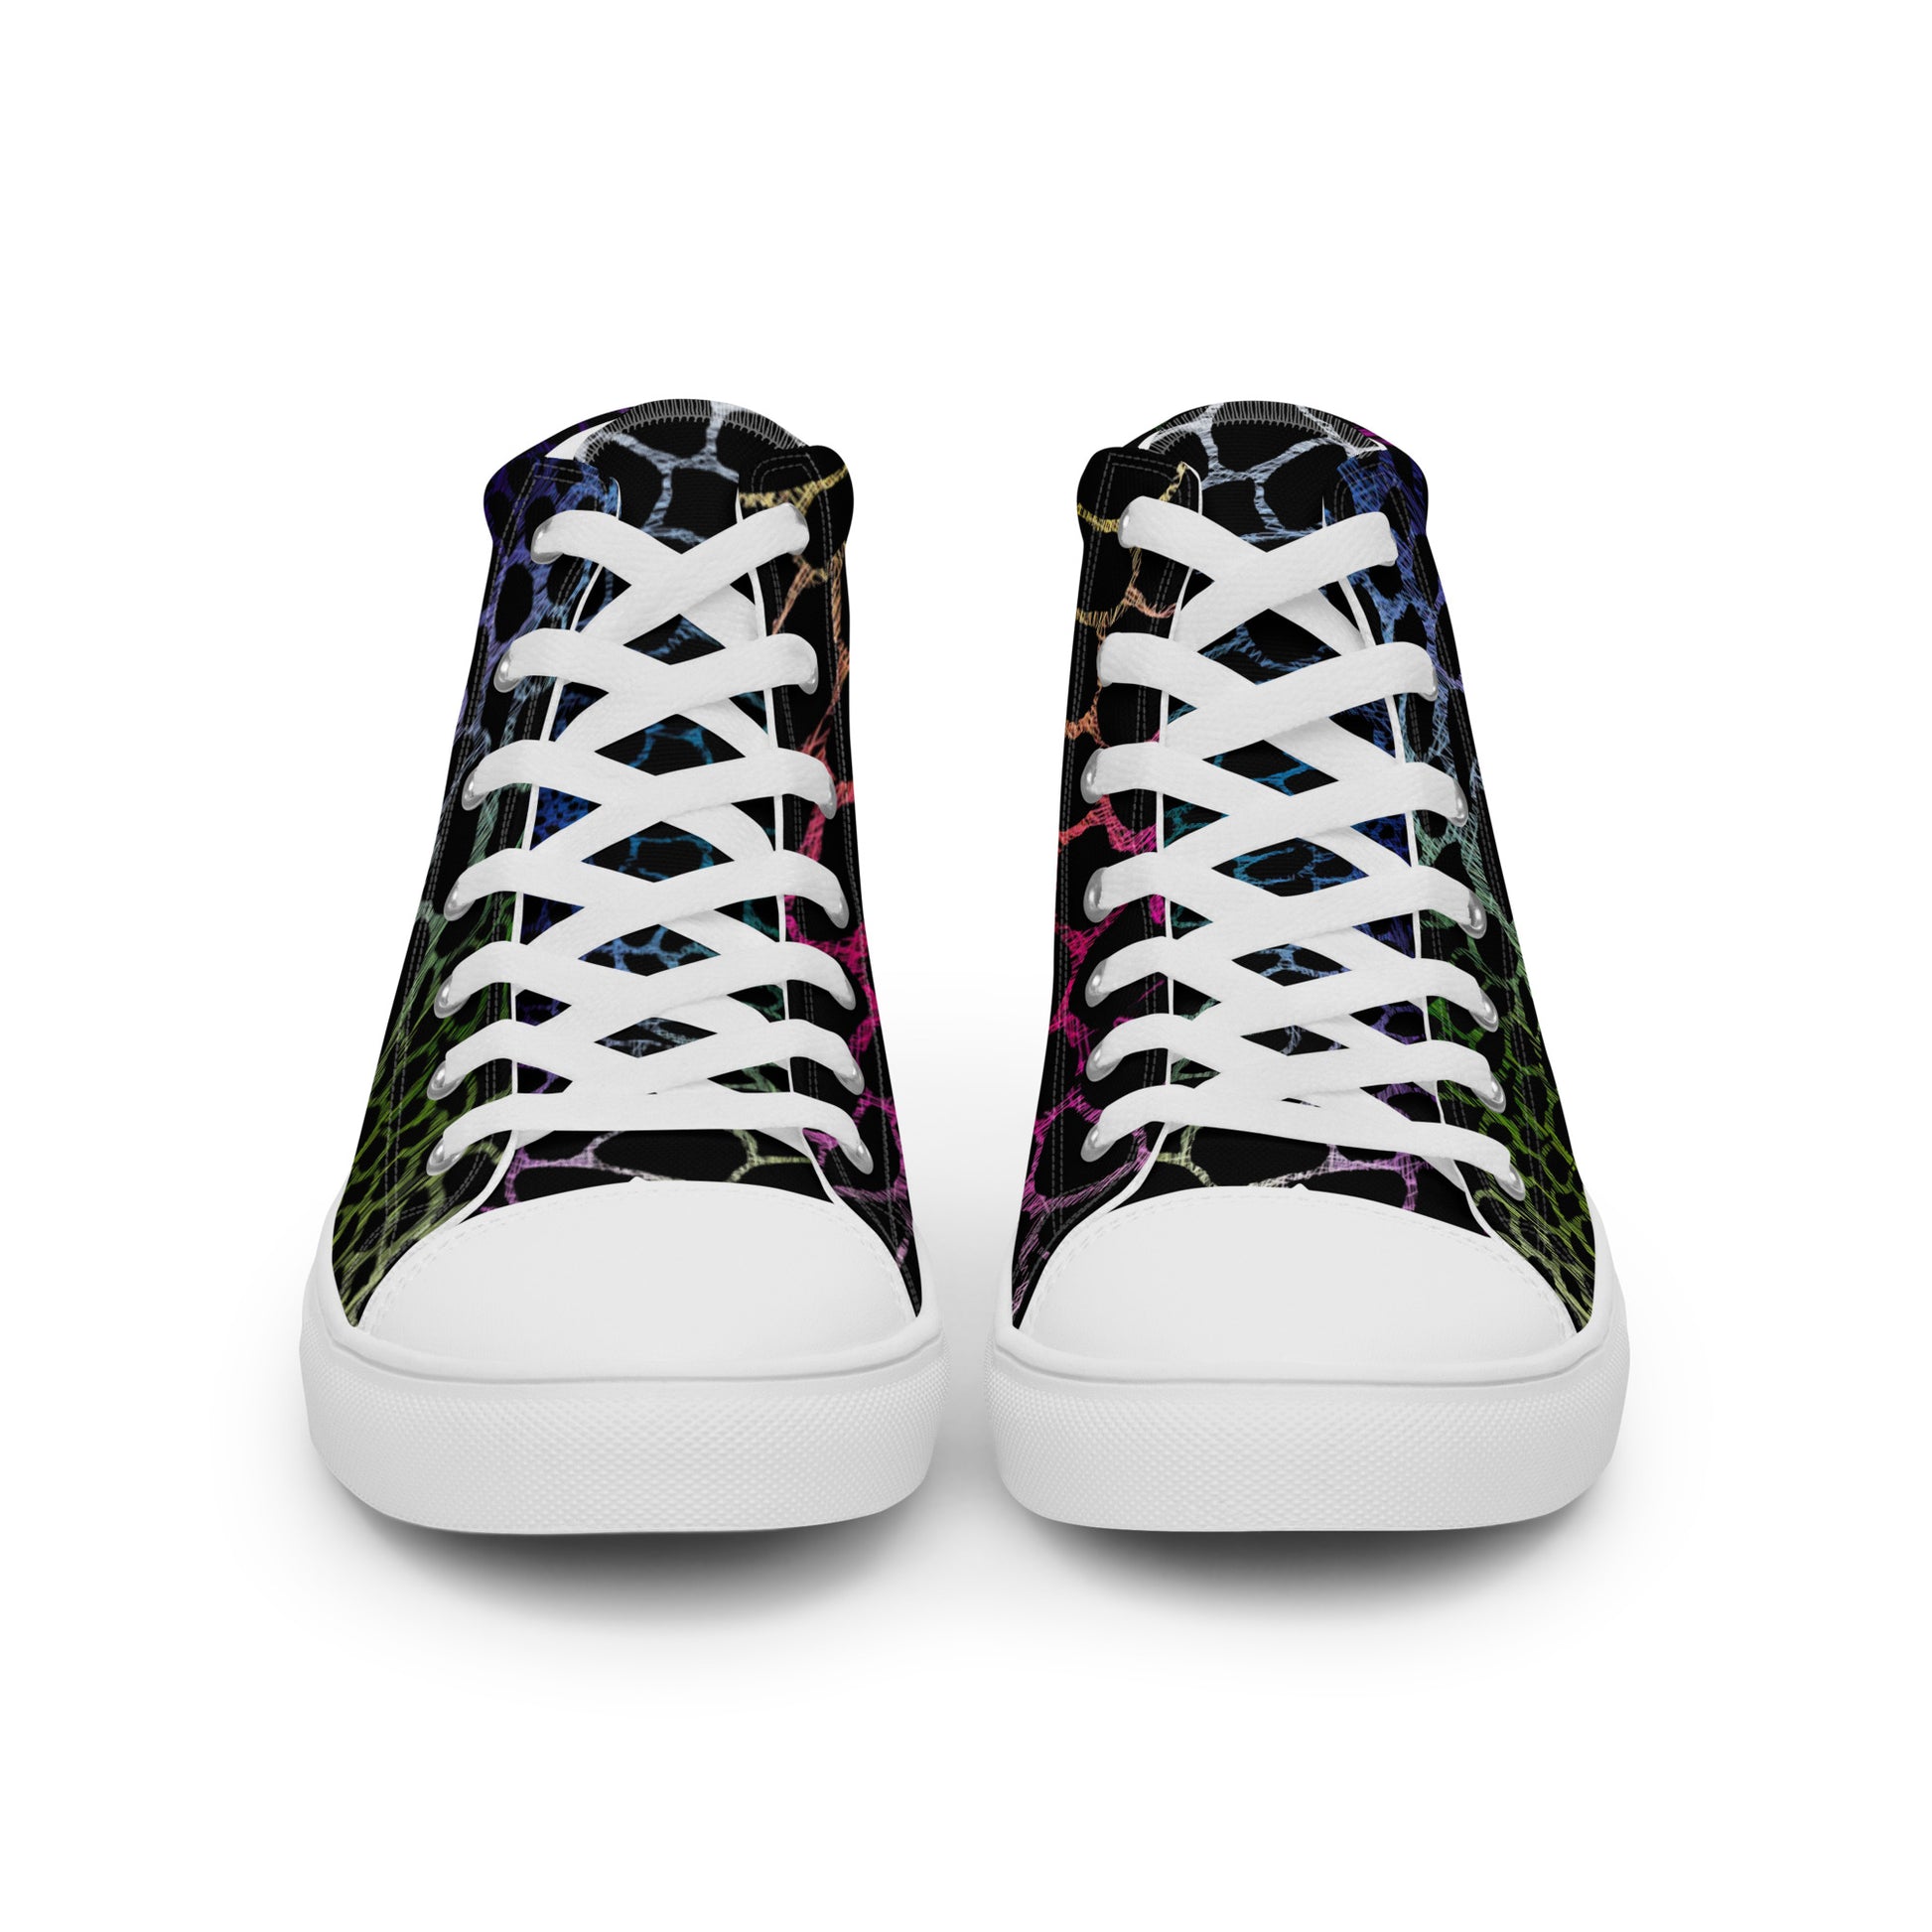 Wild Rainbow Outline Men’s High Top Canvas Shoes | Casual Print Shoes | Stylish Festival Sneakers | LGBTQ+ Shoes | Lace Up Sneakers | - Comfortable Culture - Shoes - Comfortable Culture